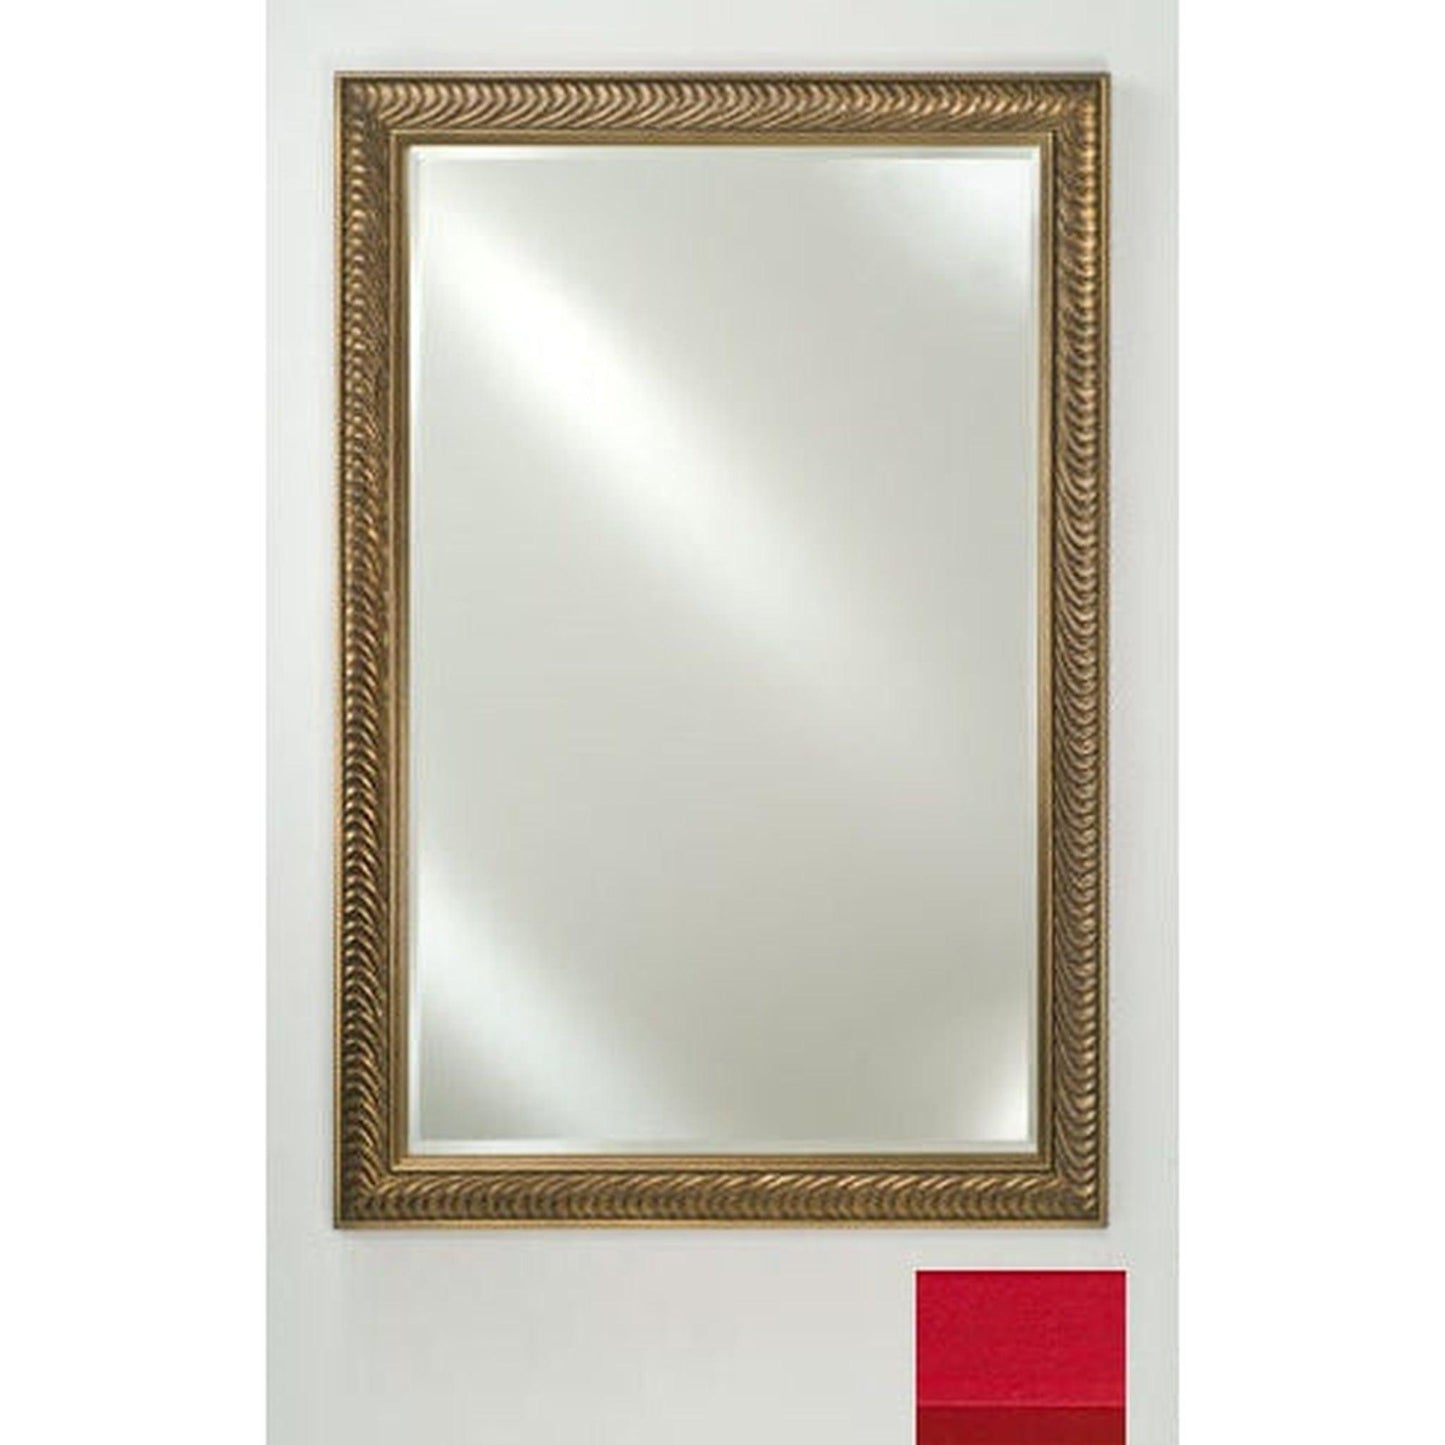 Afina Signature 20" x 26" Colorgrain Red Framed Mirror With Beveled Edge